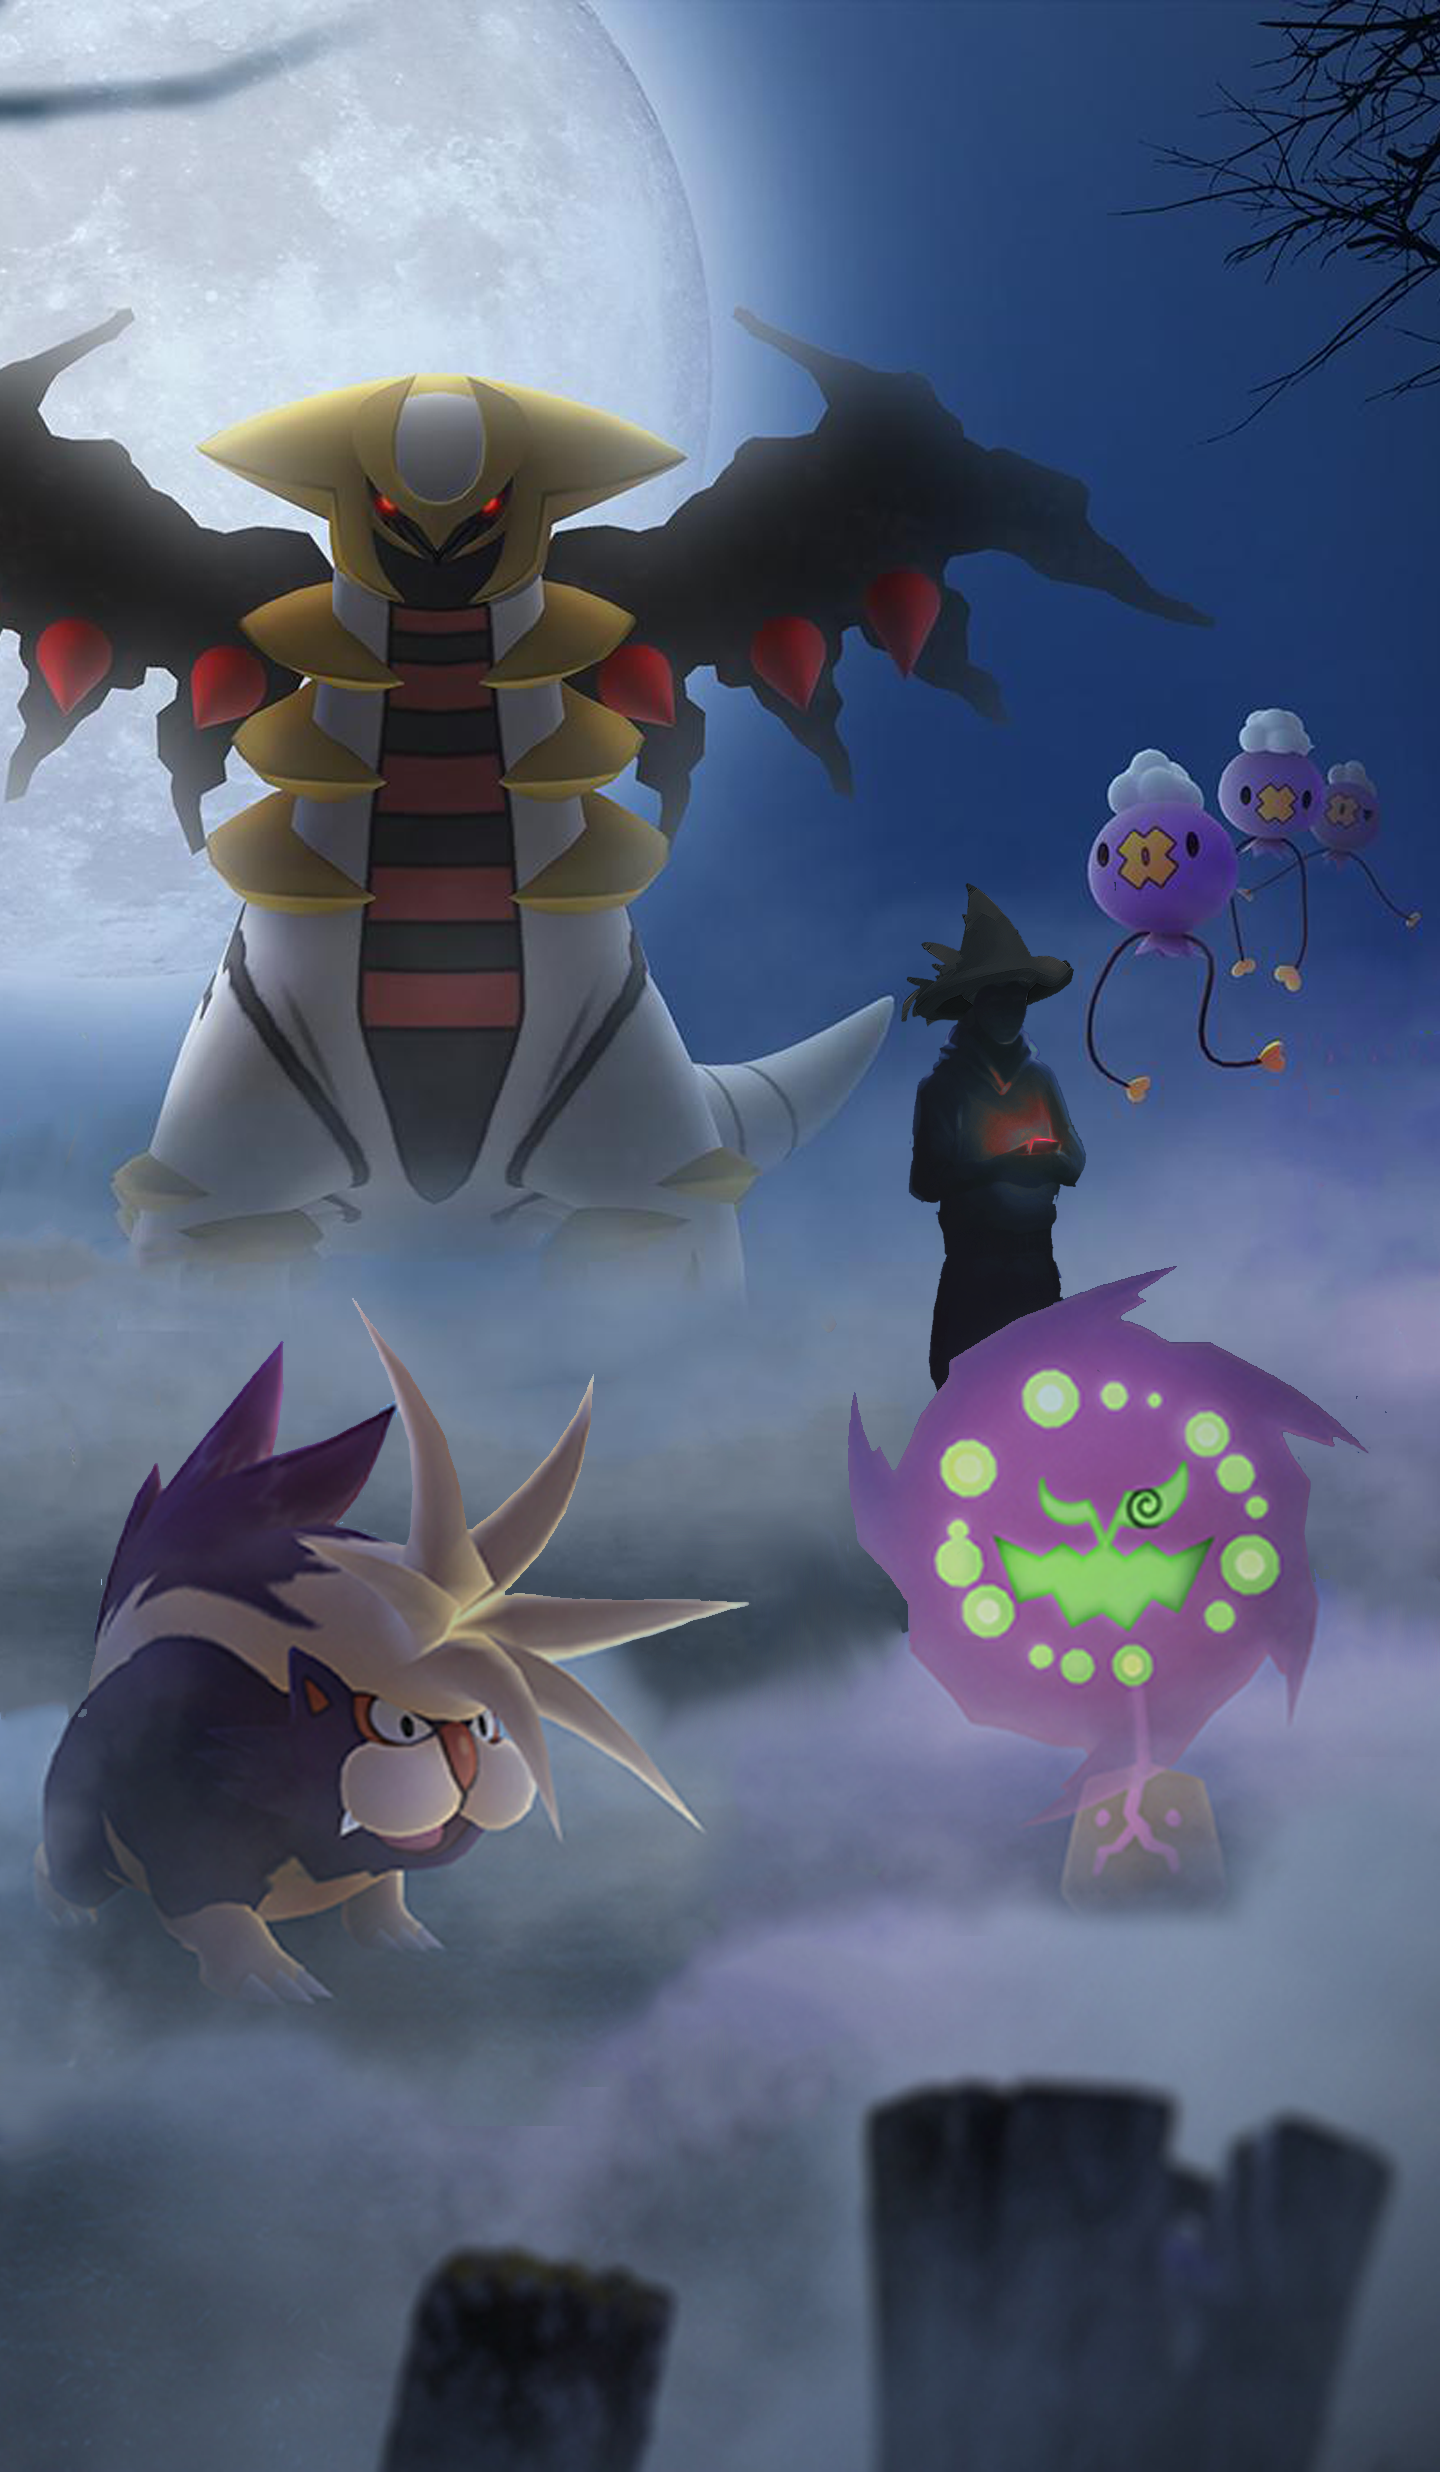 I was sad we didn't get a Halloween loading screen, so I made one